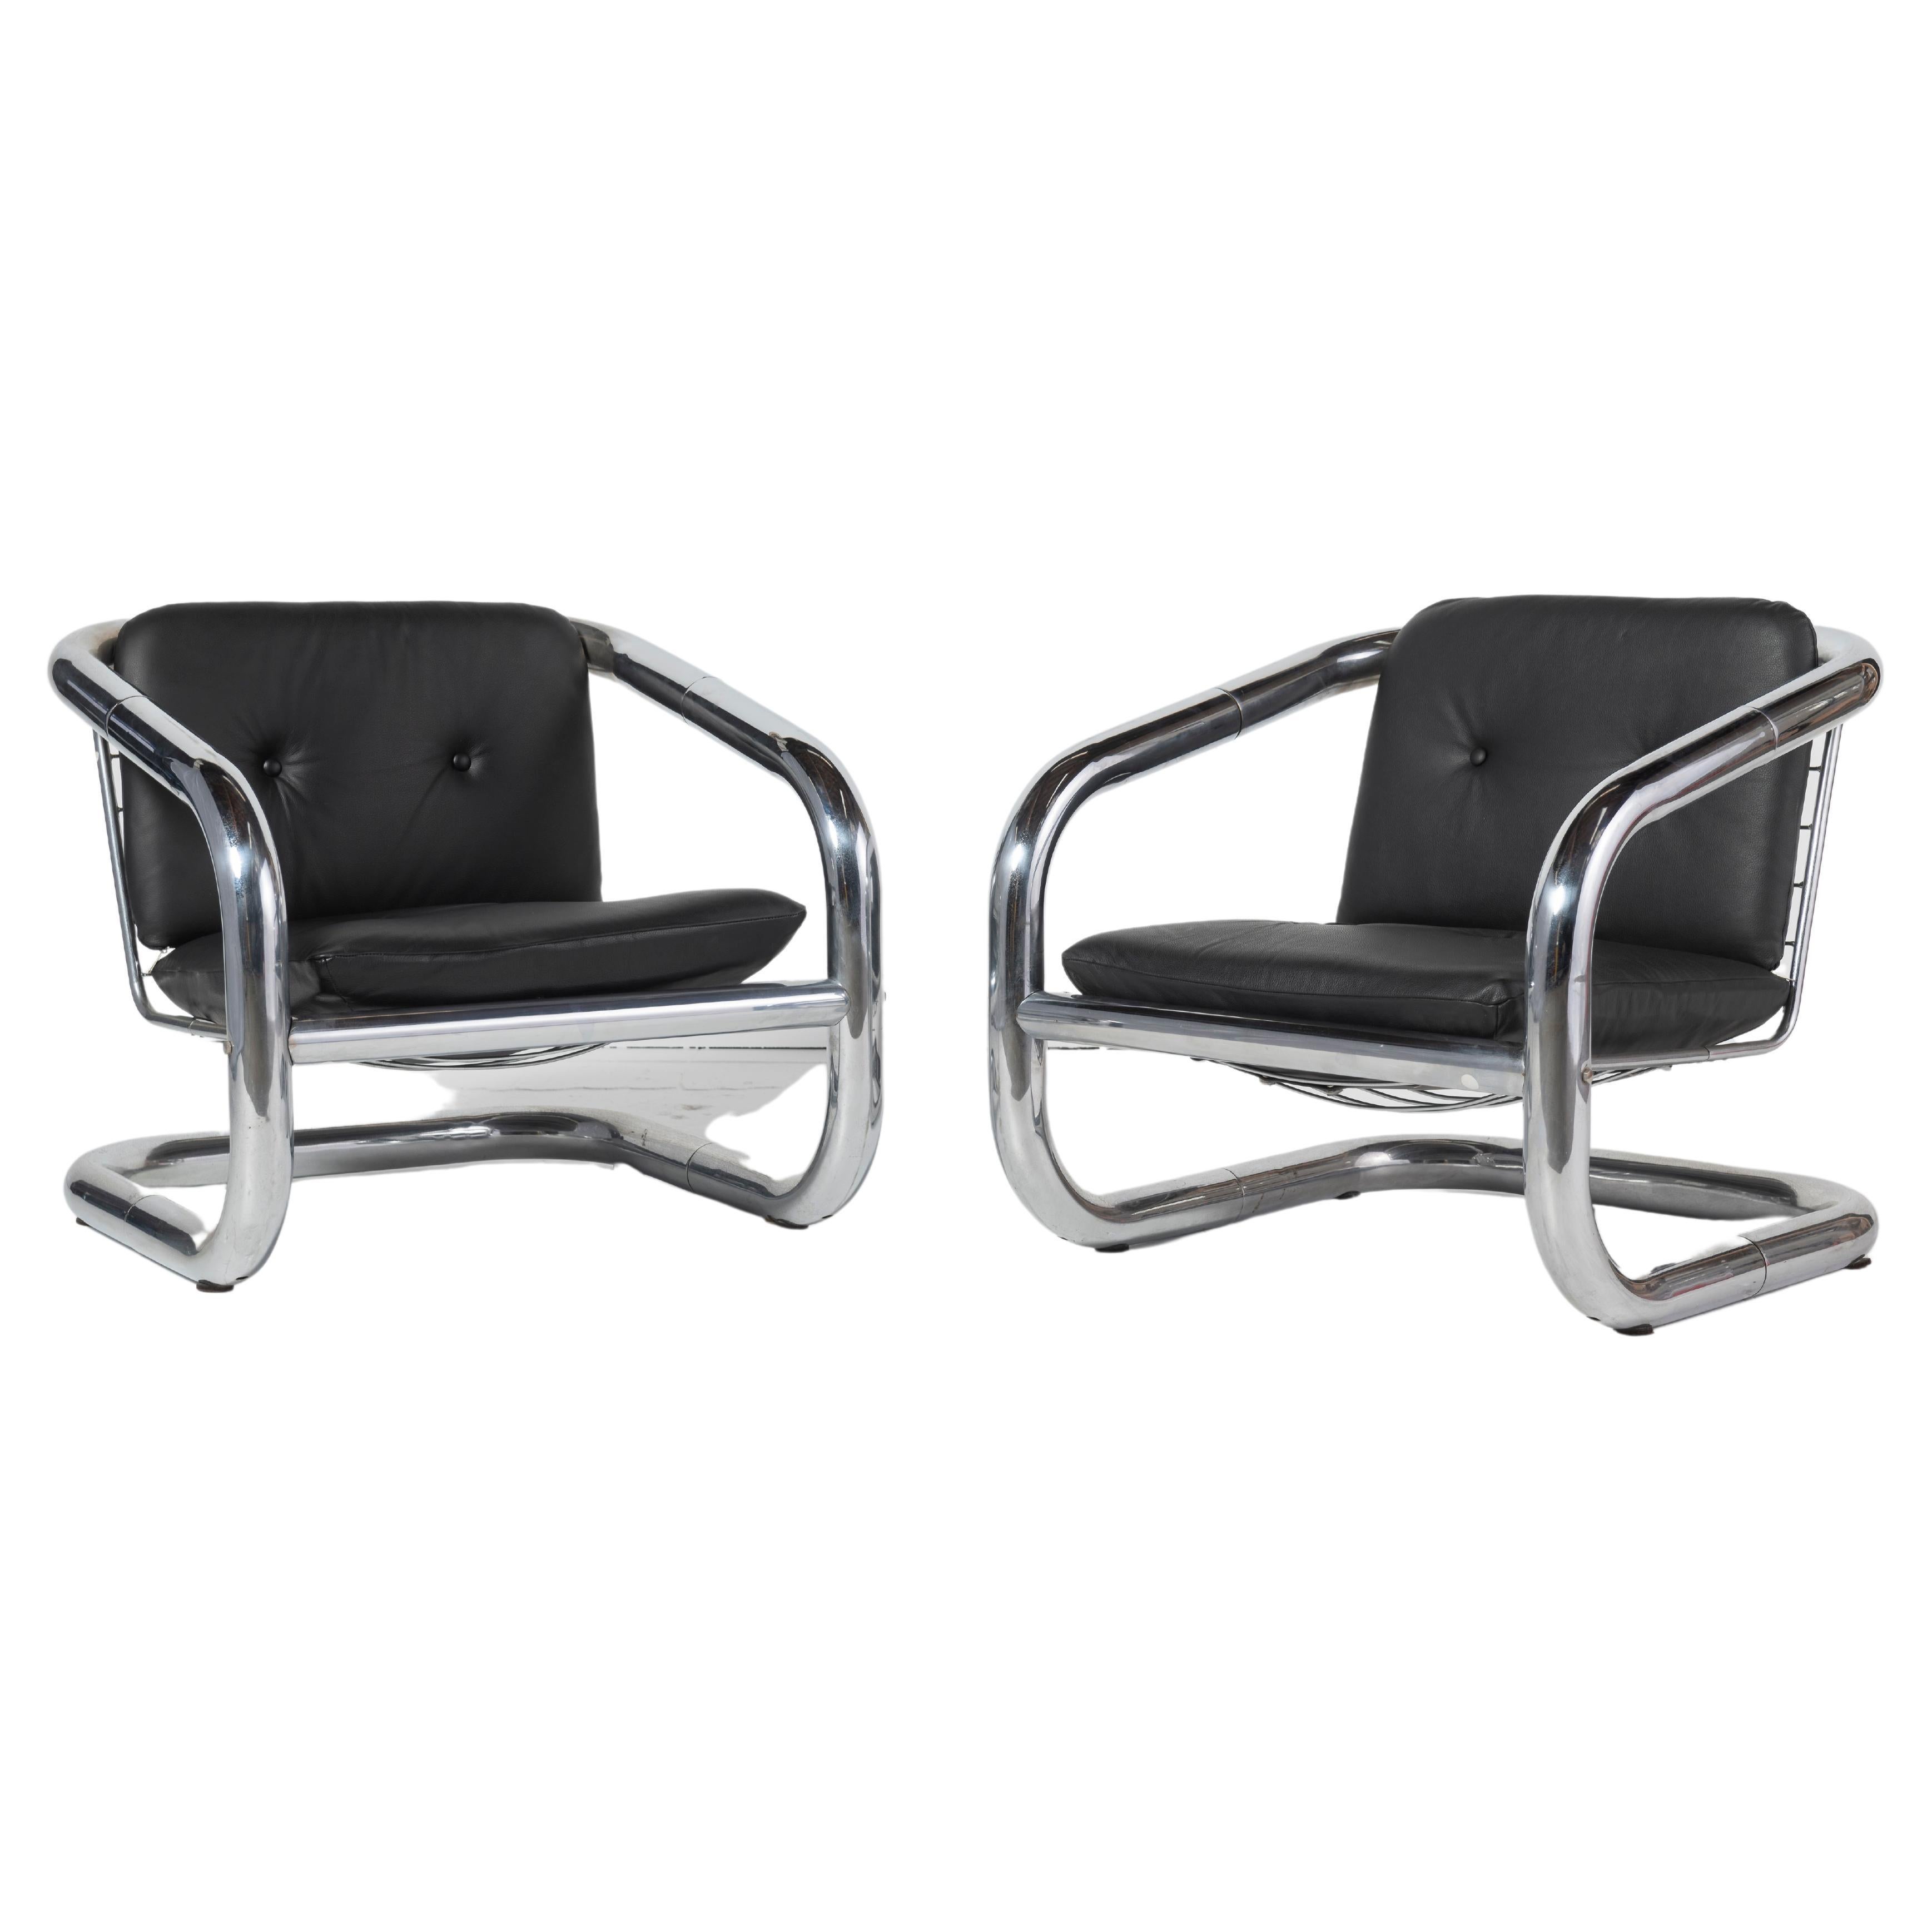 Pair of Chrome and Leather Armchairs by L'Atelier San Paulo For Sale